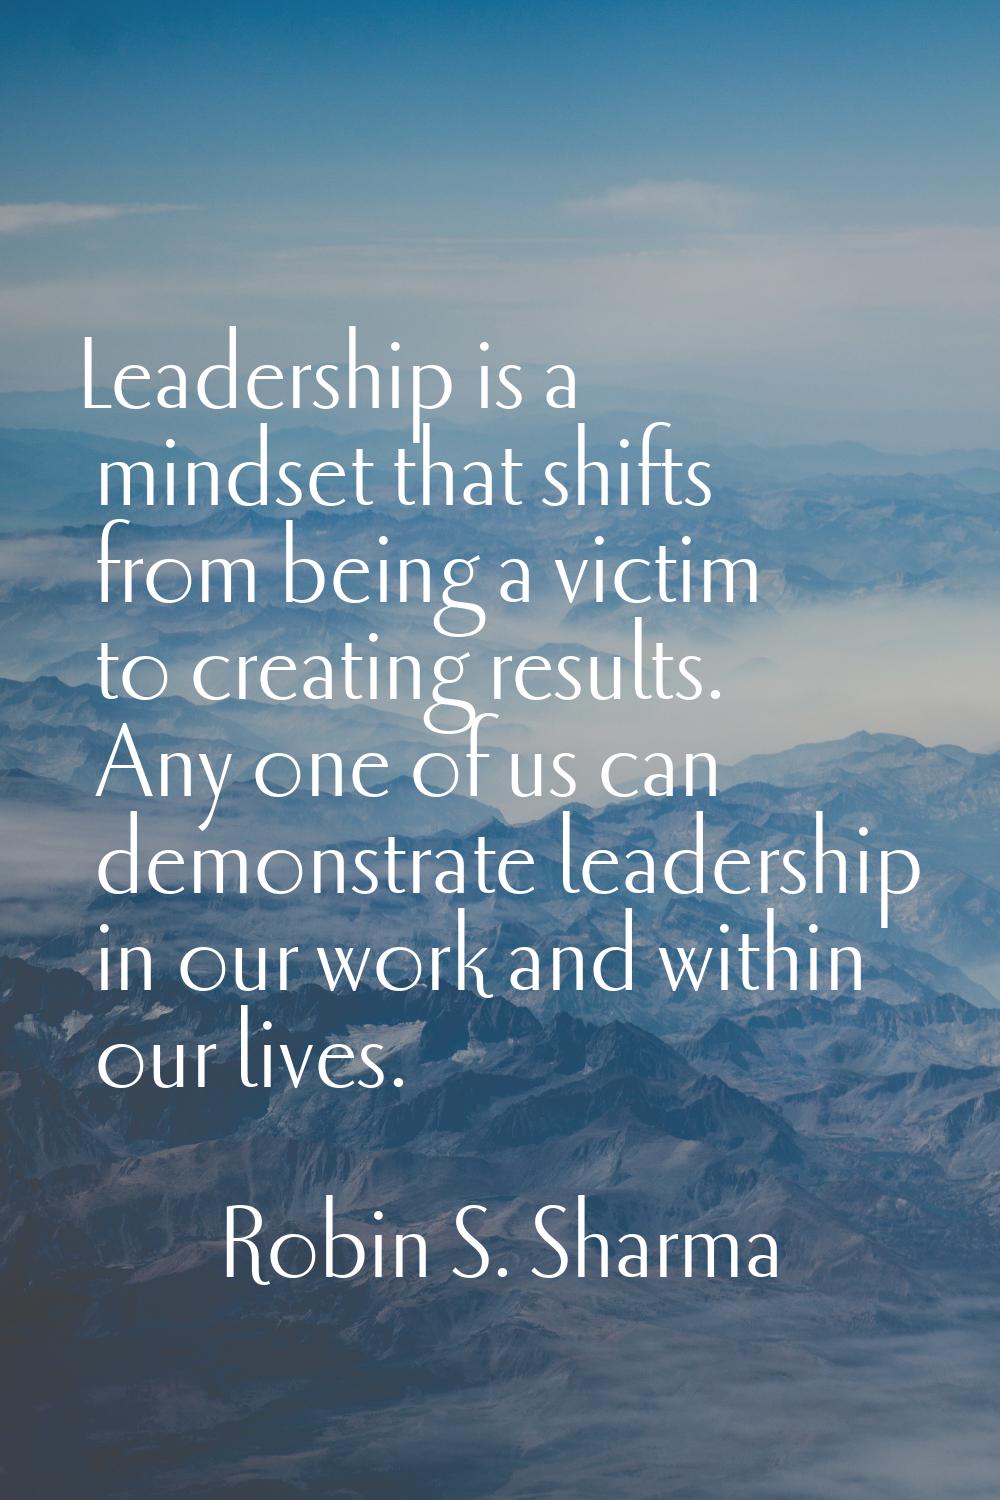 Leadership is a mindset that shifts from being a victim to creating results. Any one of us can demo